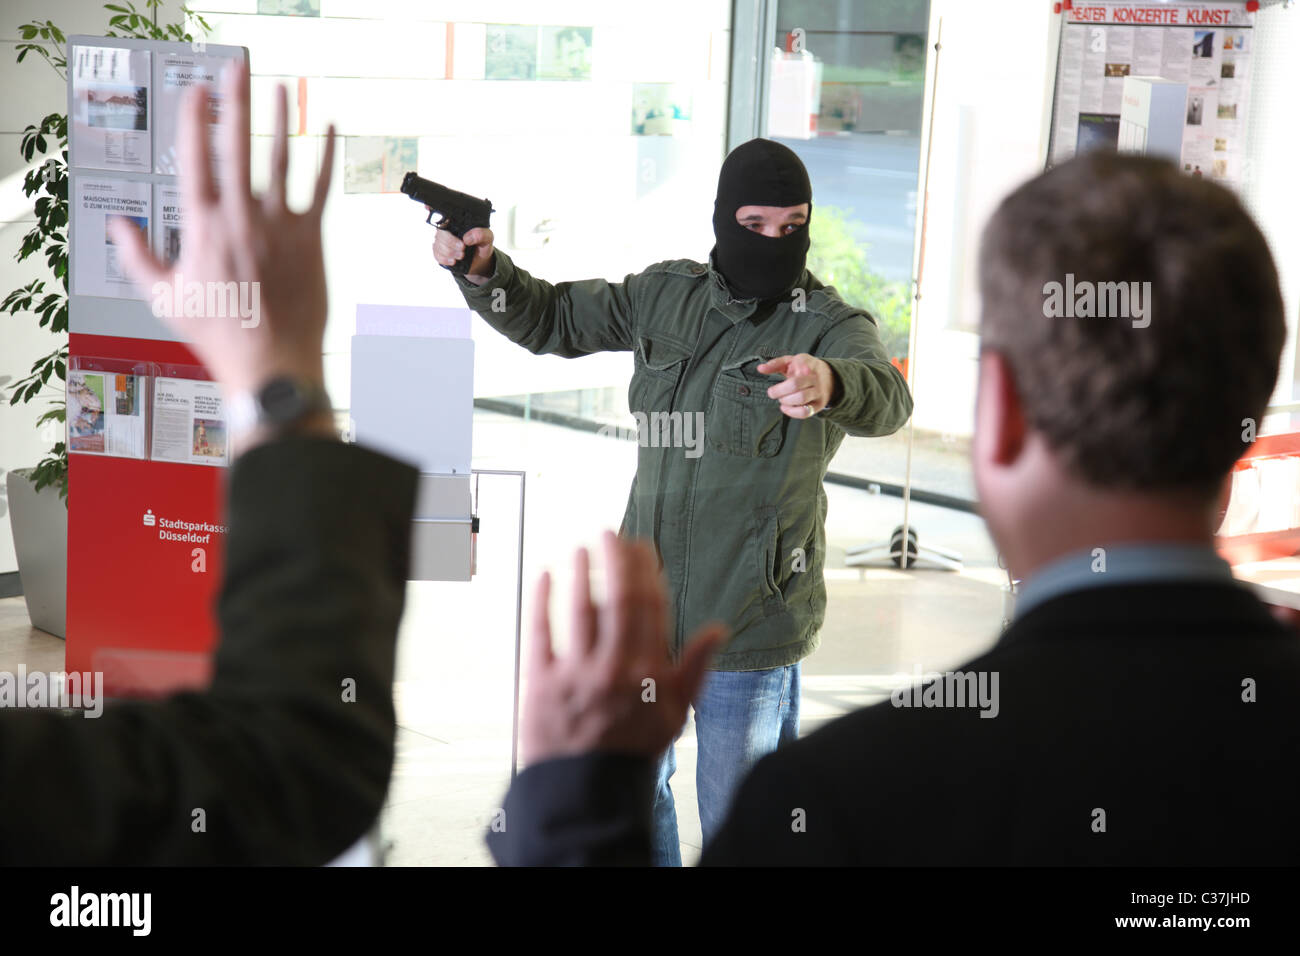 Police exercise. Bank robbery. Bank robber with a gun takes hostages in a bank. Stock Photo